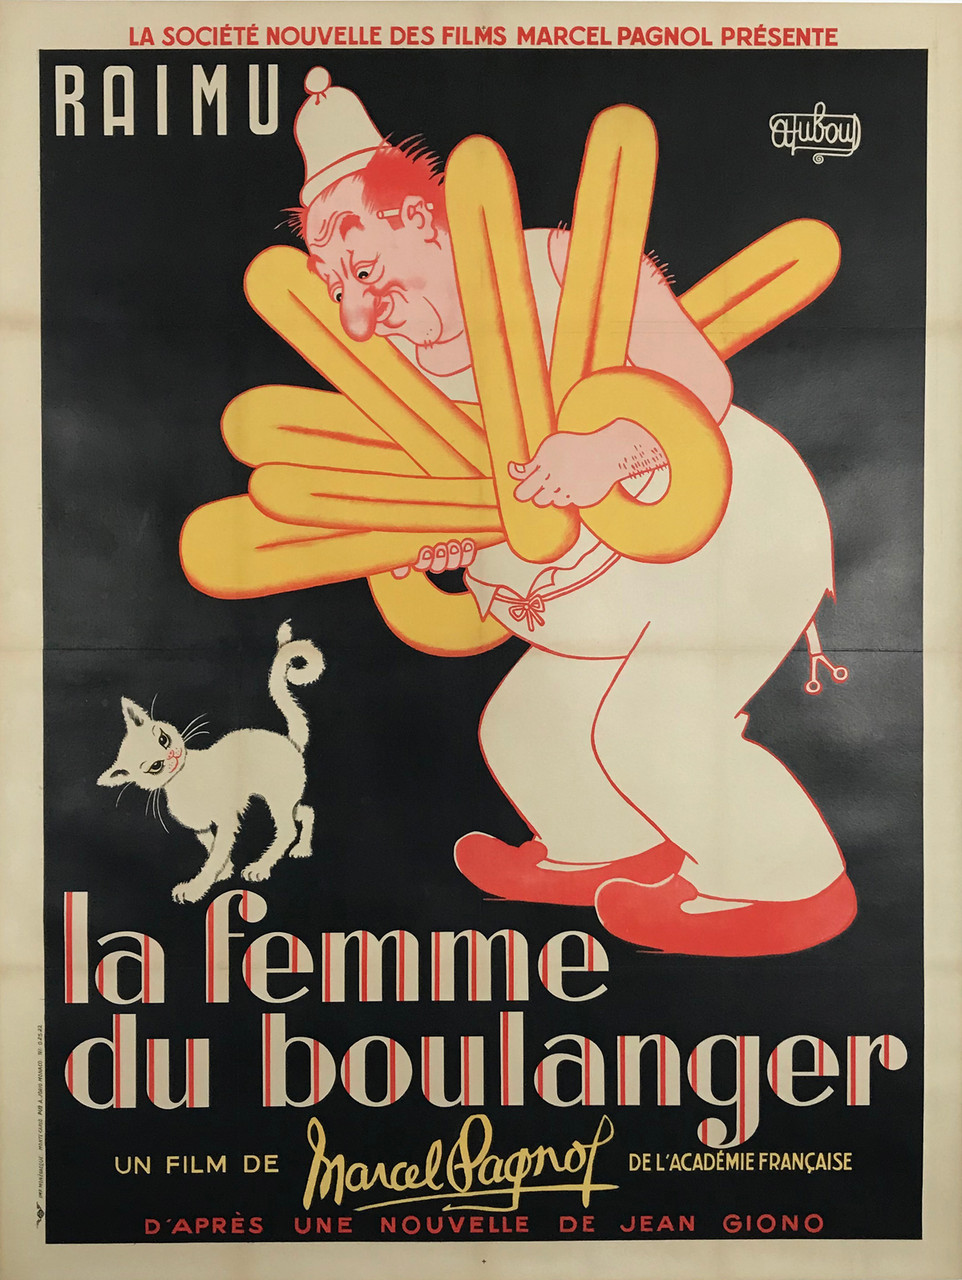 La Femme du Boulanger by Albert Dubout Original 1951 Vintage French Re Release Movie Poster Lithograph Linen Backed. The Baker's Wife Directed by Marcel Pagnol with Raimu